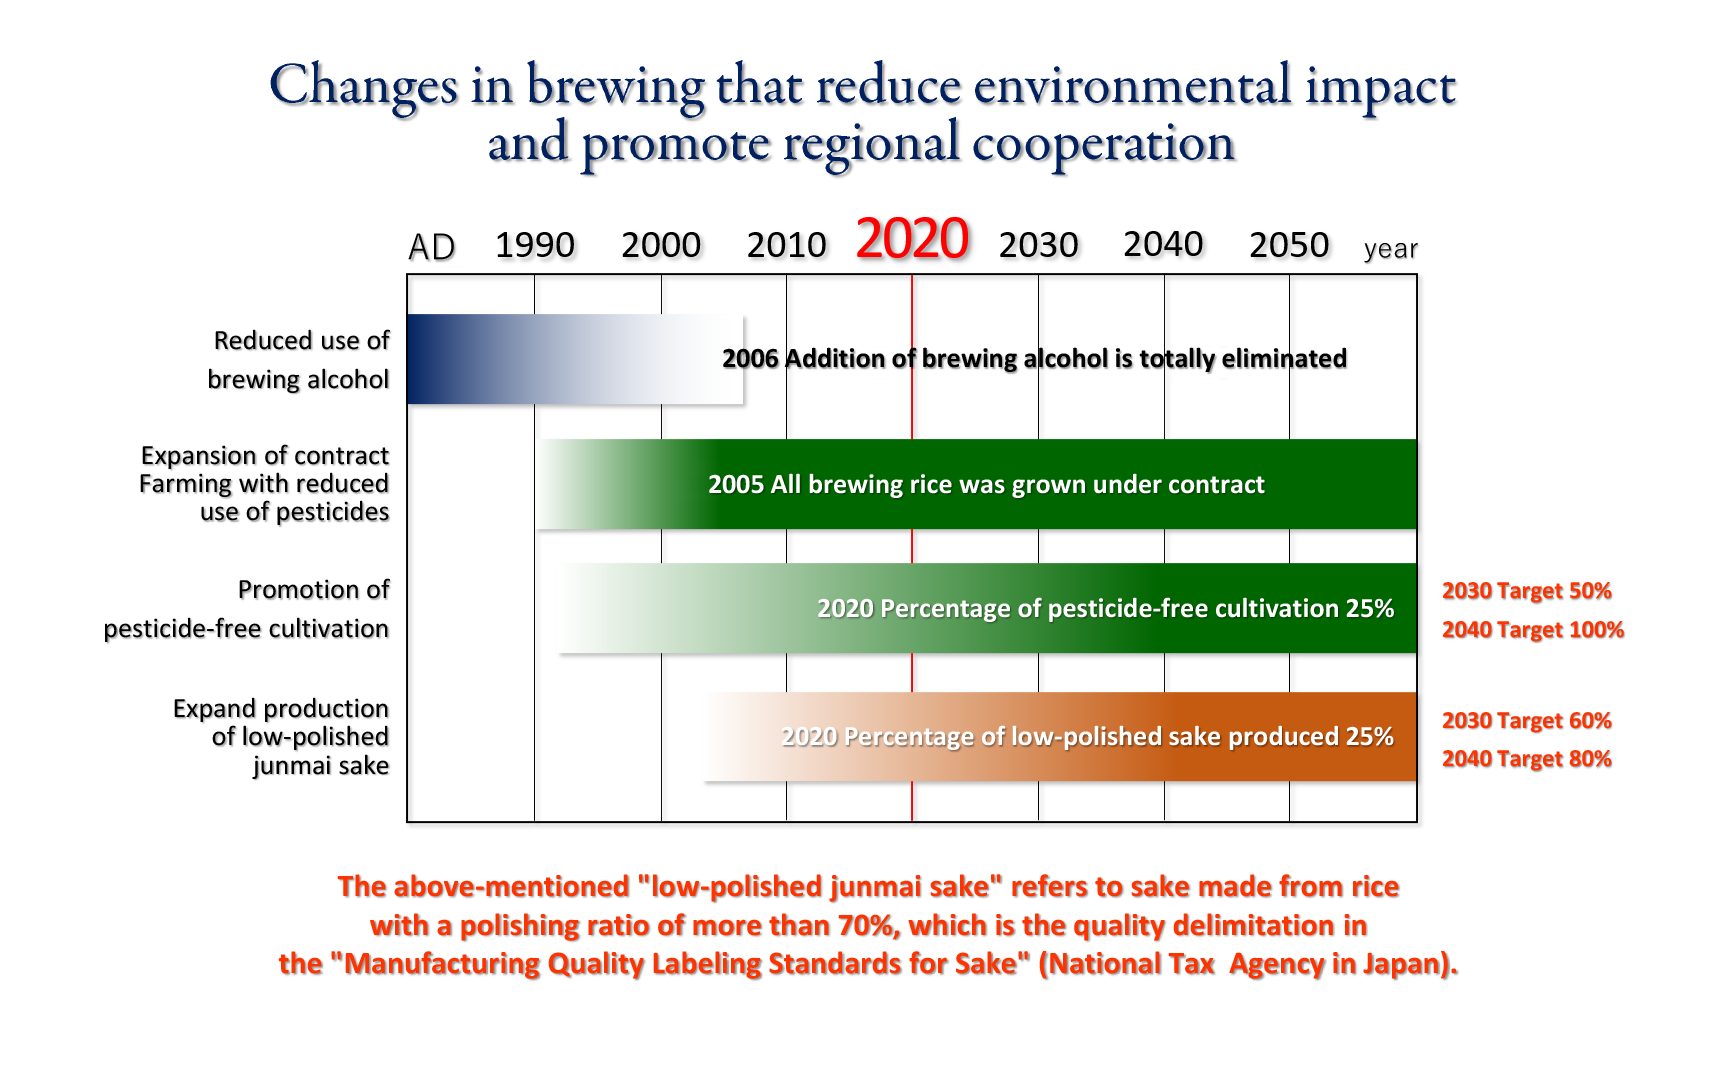 Changes in brewing that reduce environmental impact and promote regional cooperation